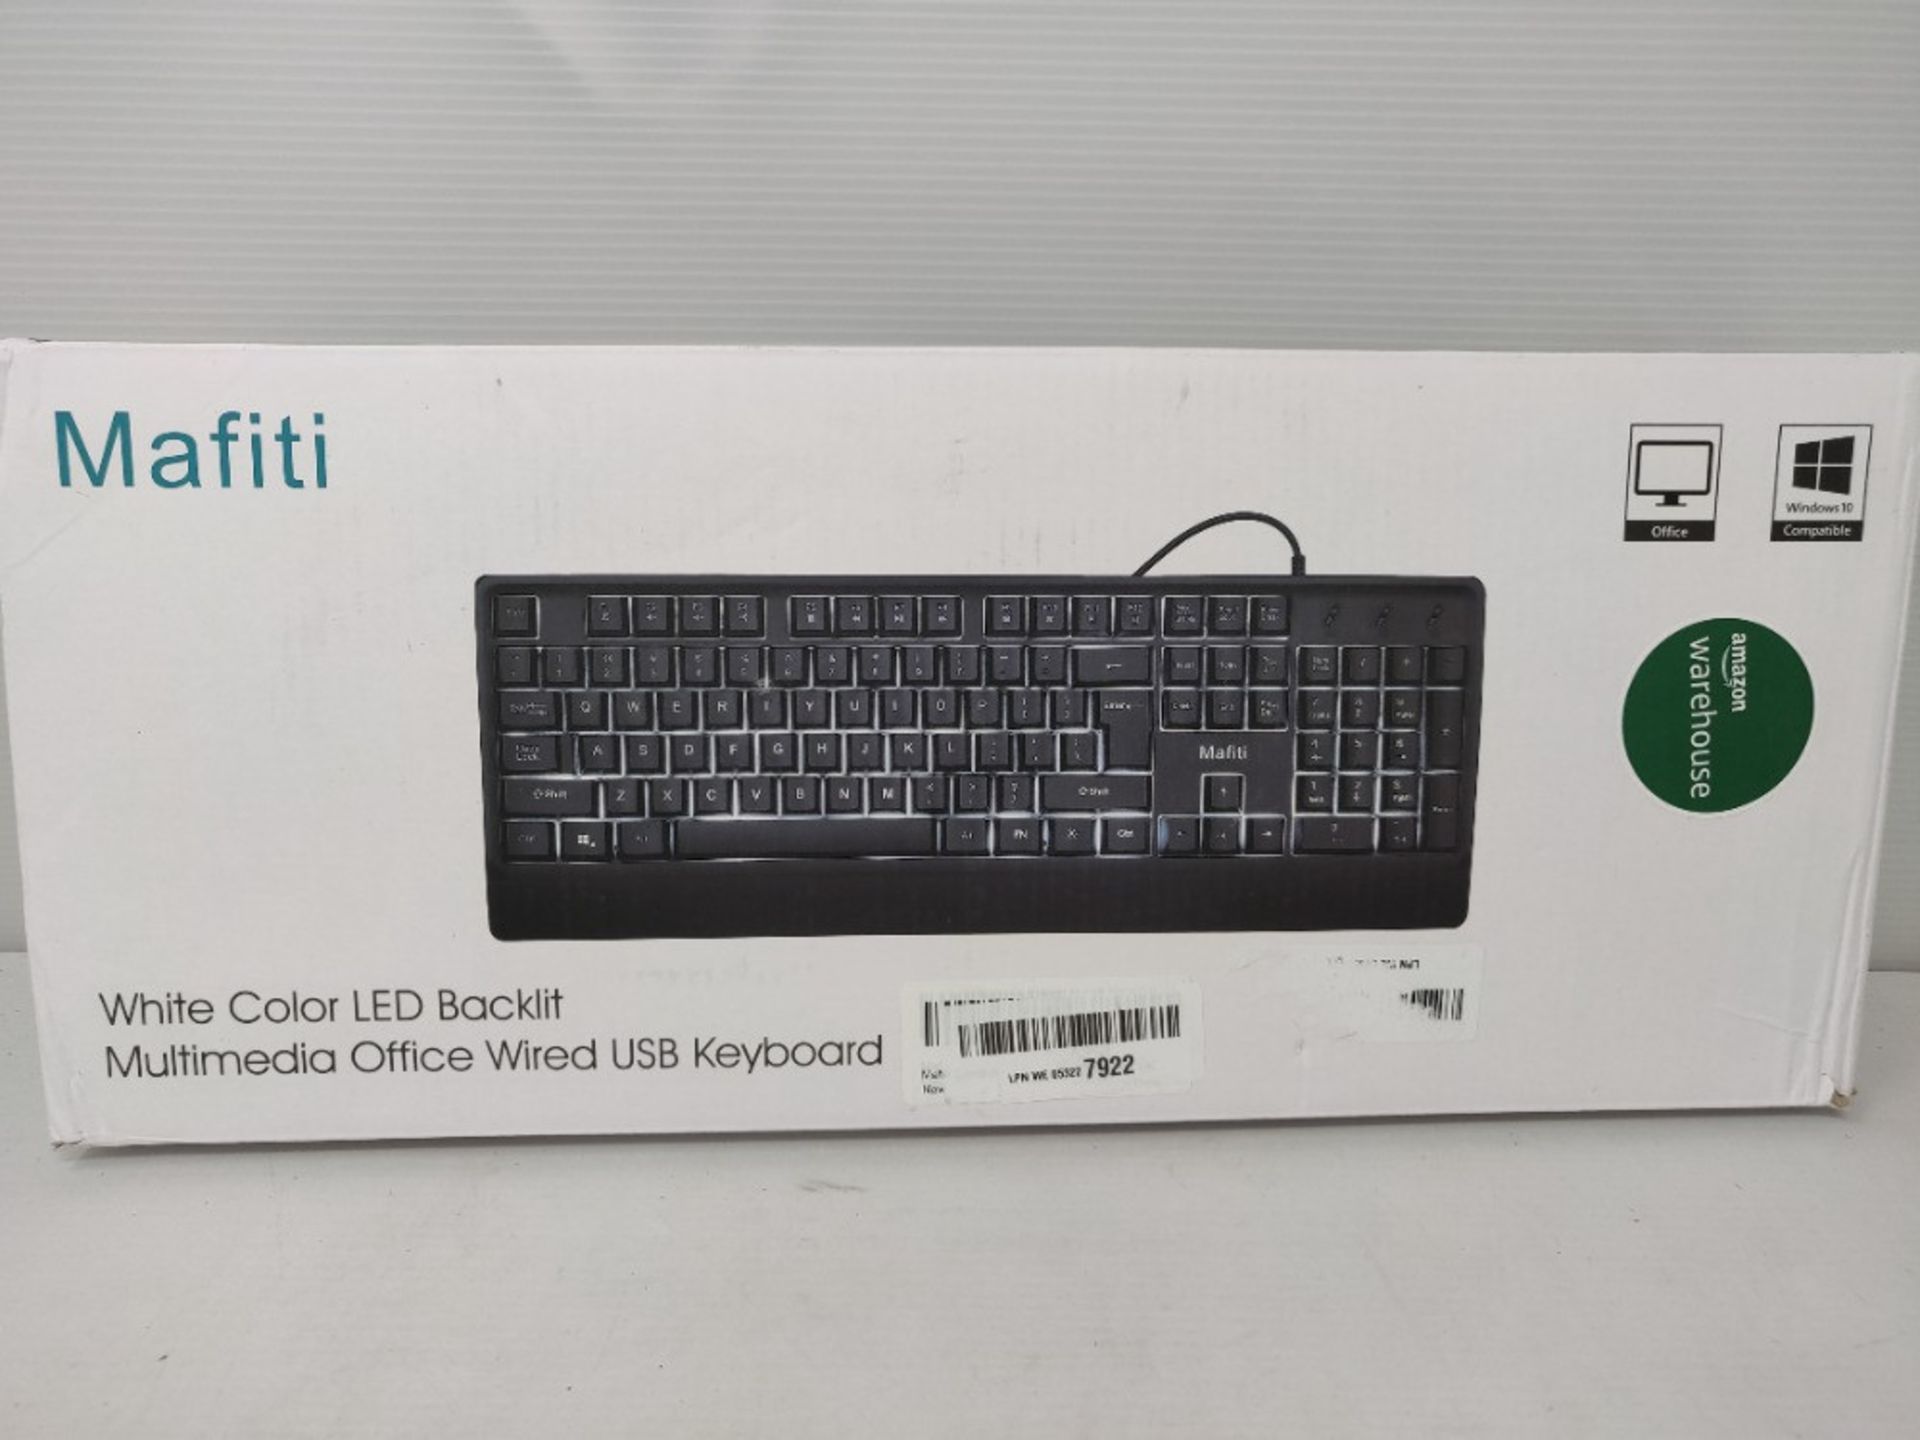 [INCOMPLETE] [CRACKED] mafiti Computer Office Keyboard Wired USB 104 Keys Full Size Wh